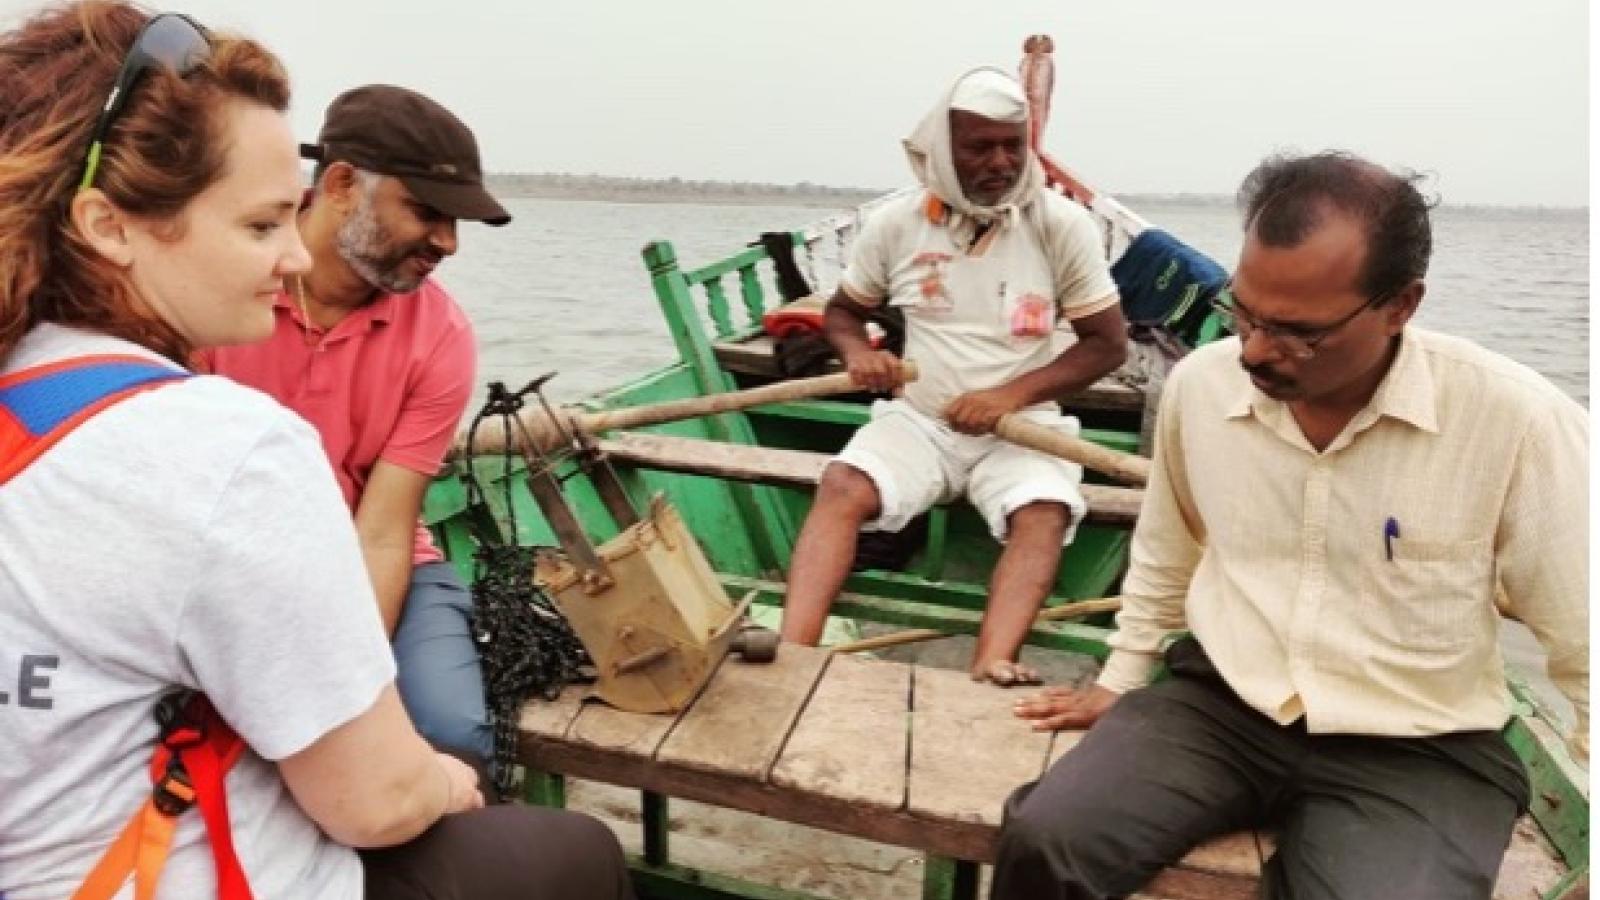 Prof. Leonard-Pingel and colleagues inspecting a lake between Pune and Nagpur. Photo Credit to Prof. Leonard-Pingel. 